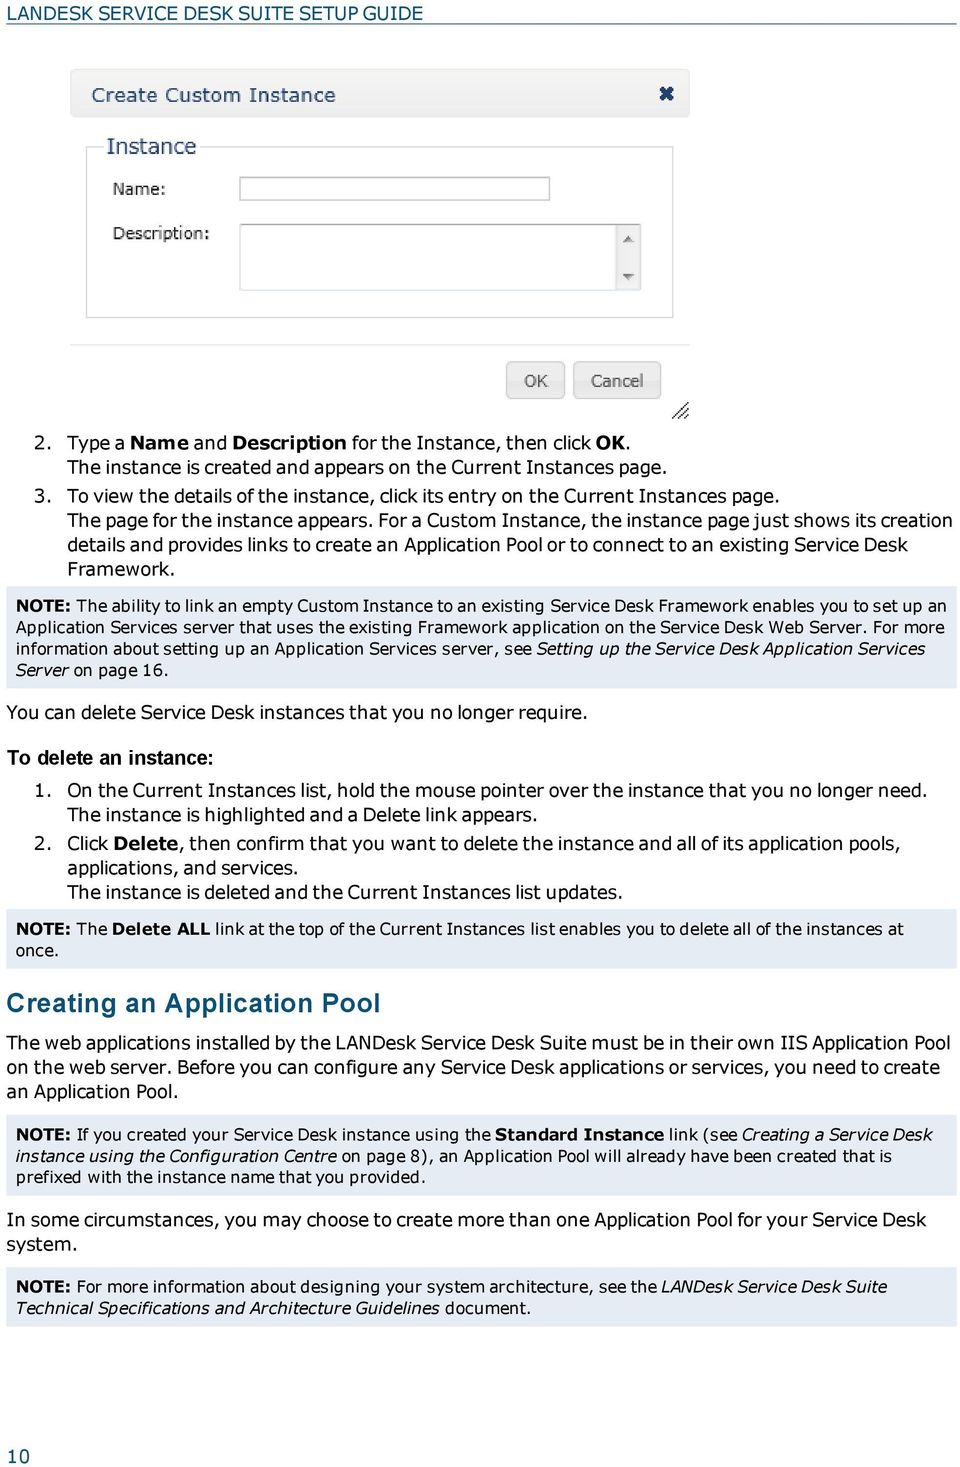 For a Custom Instance, the instance page just shows its creation details and provides links to create an Application Pool or to connect to an existing Service Desk Framework.